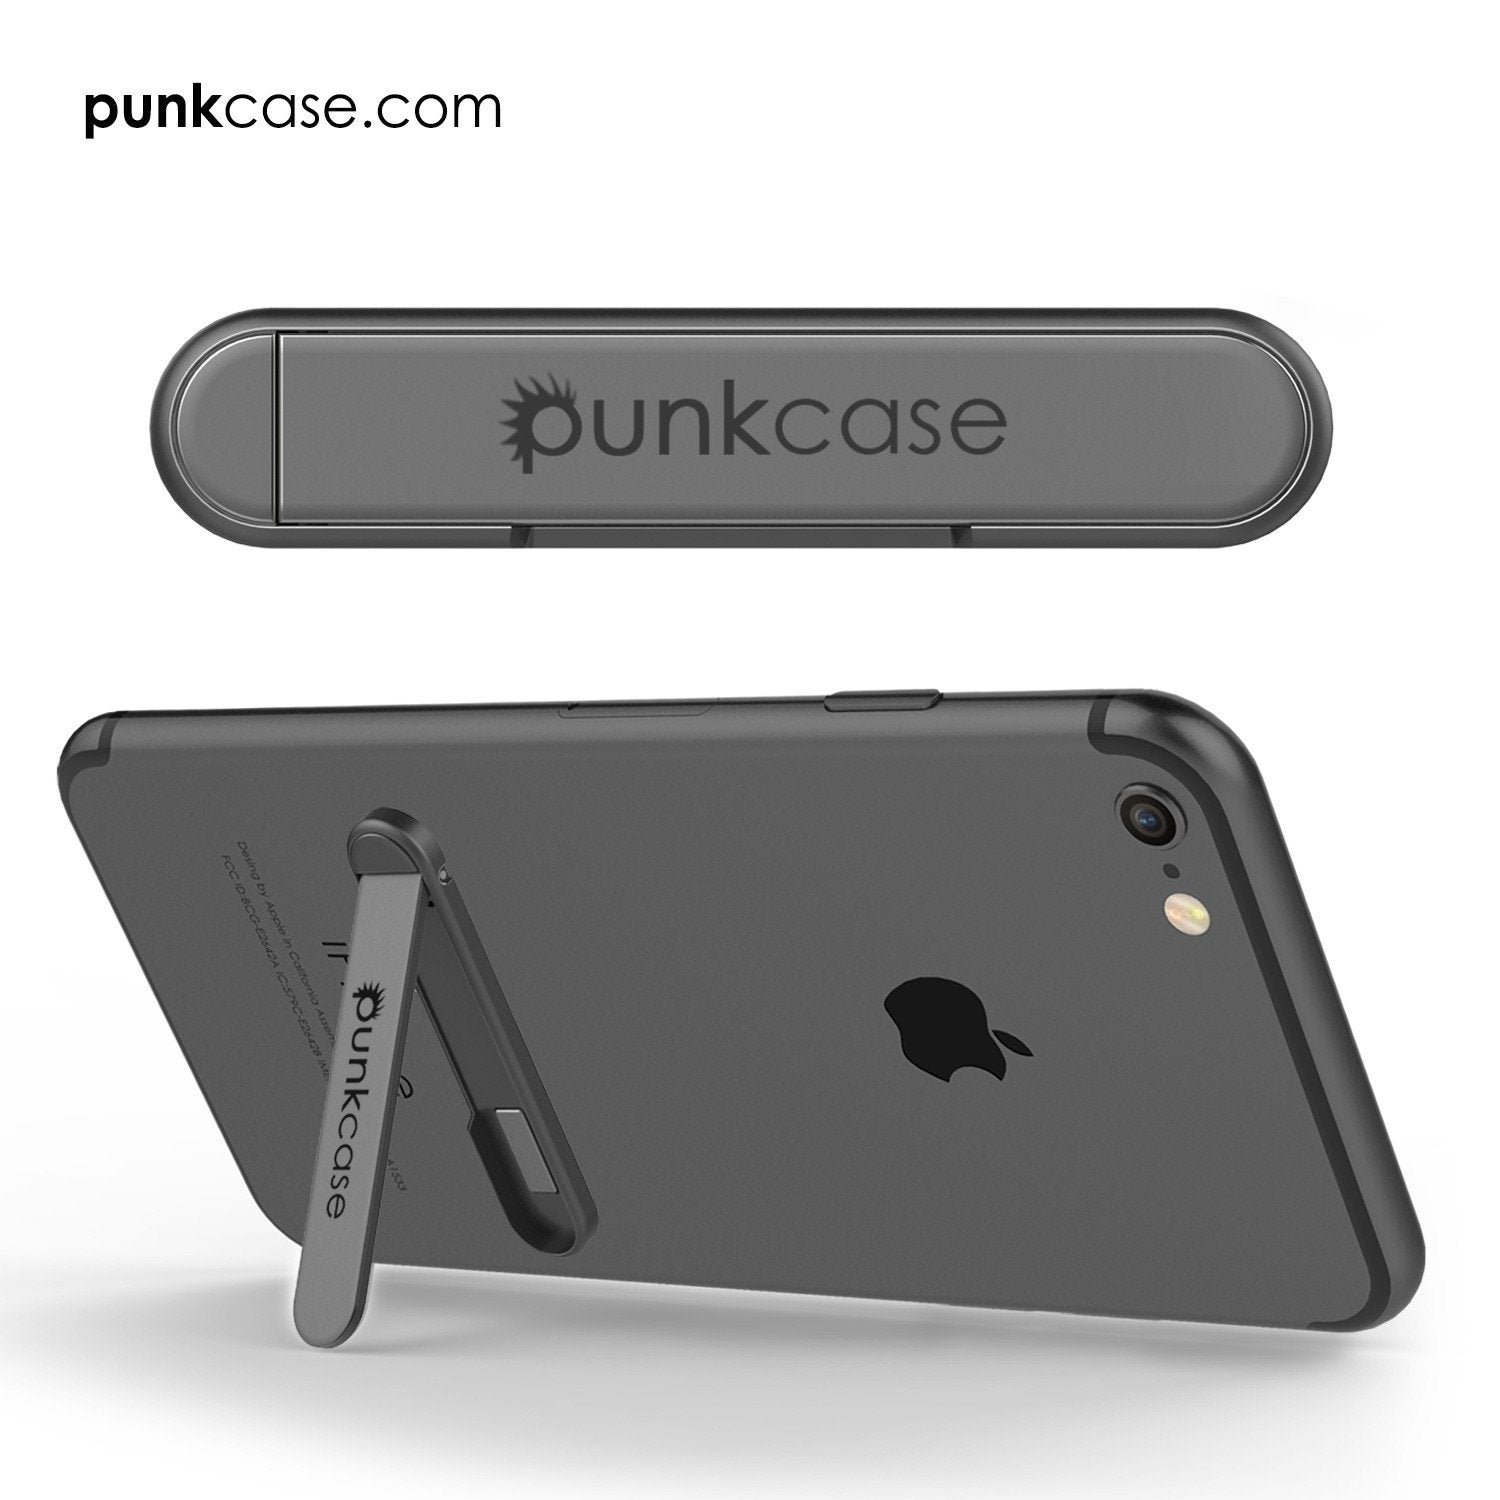 PUNKCASE FlickStick Universal Cell Phone Kickstand for all Mobile Phones & Cases with Flat Backs, One Finger Operation (Charcoal) - PunkCase NZ